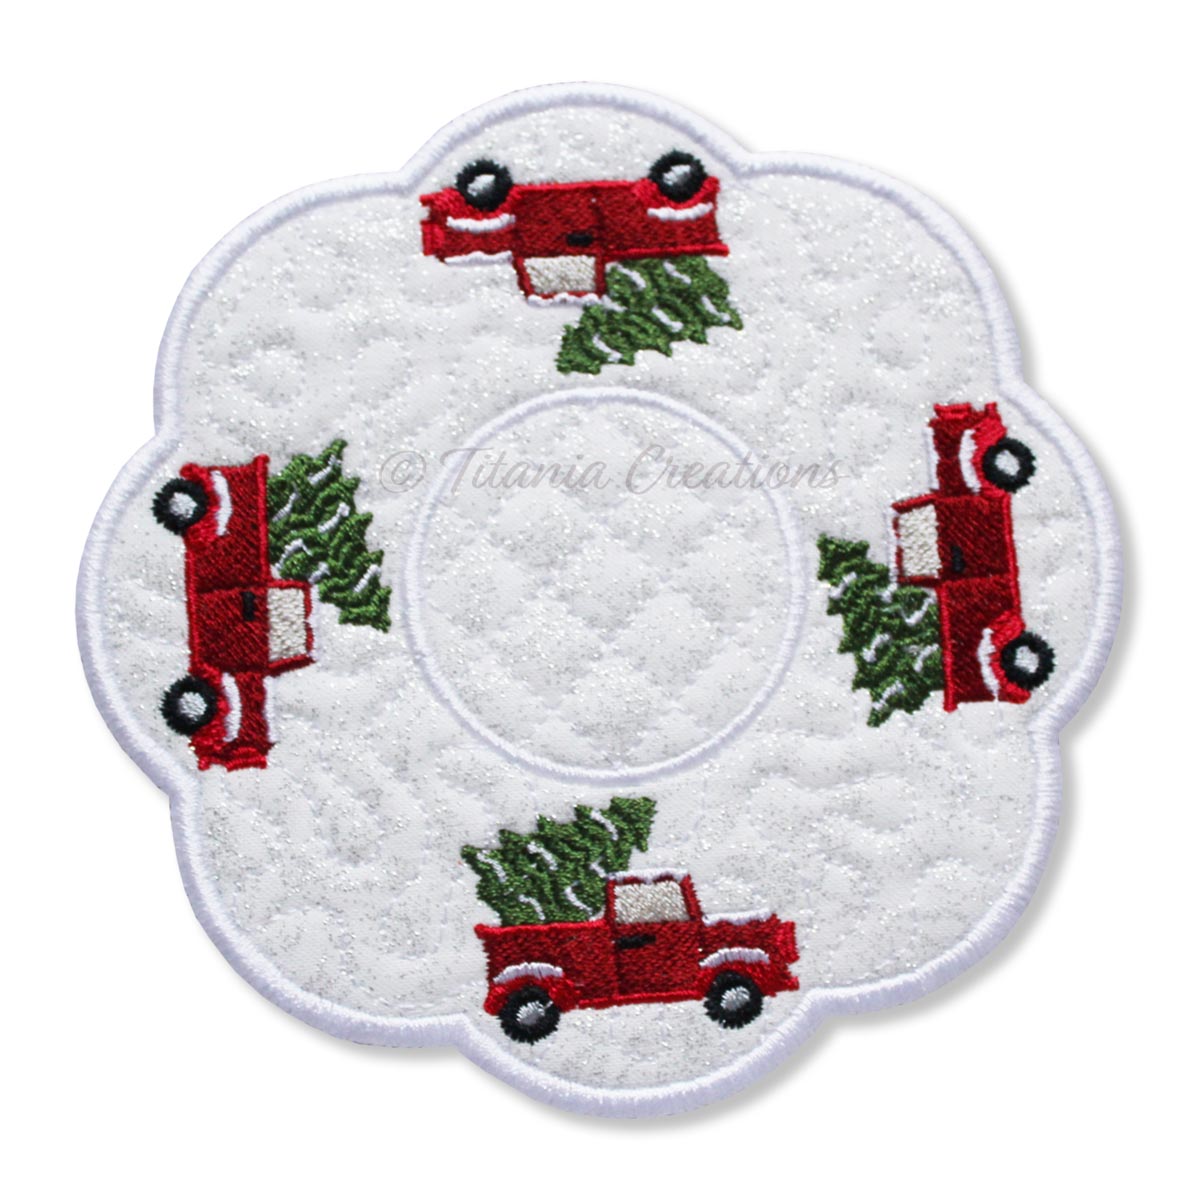 ITH Red Truck Candle Mat 5x5 6x6 7x7 8x8